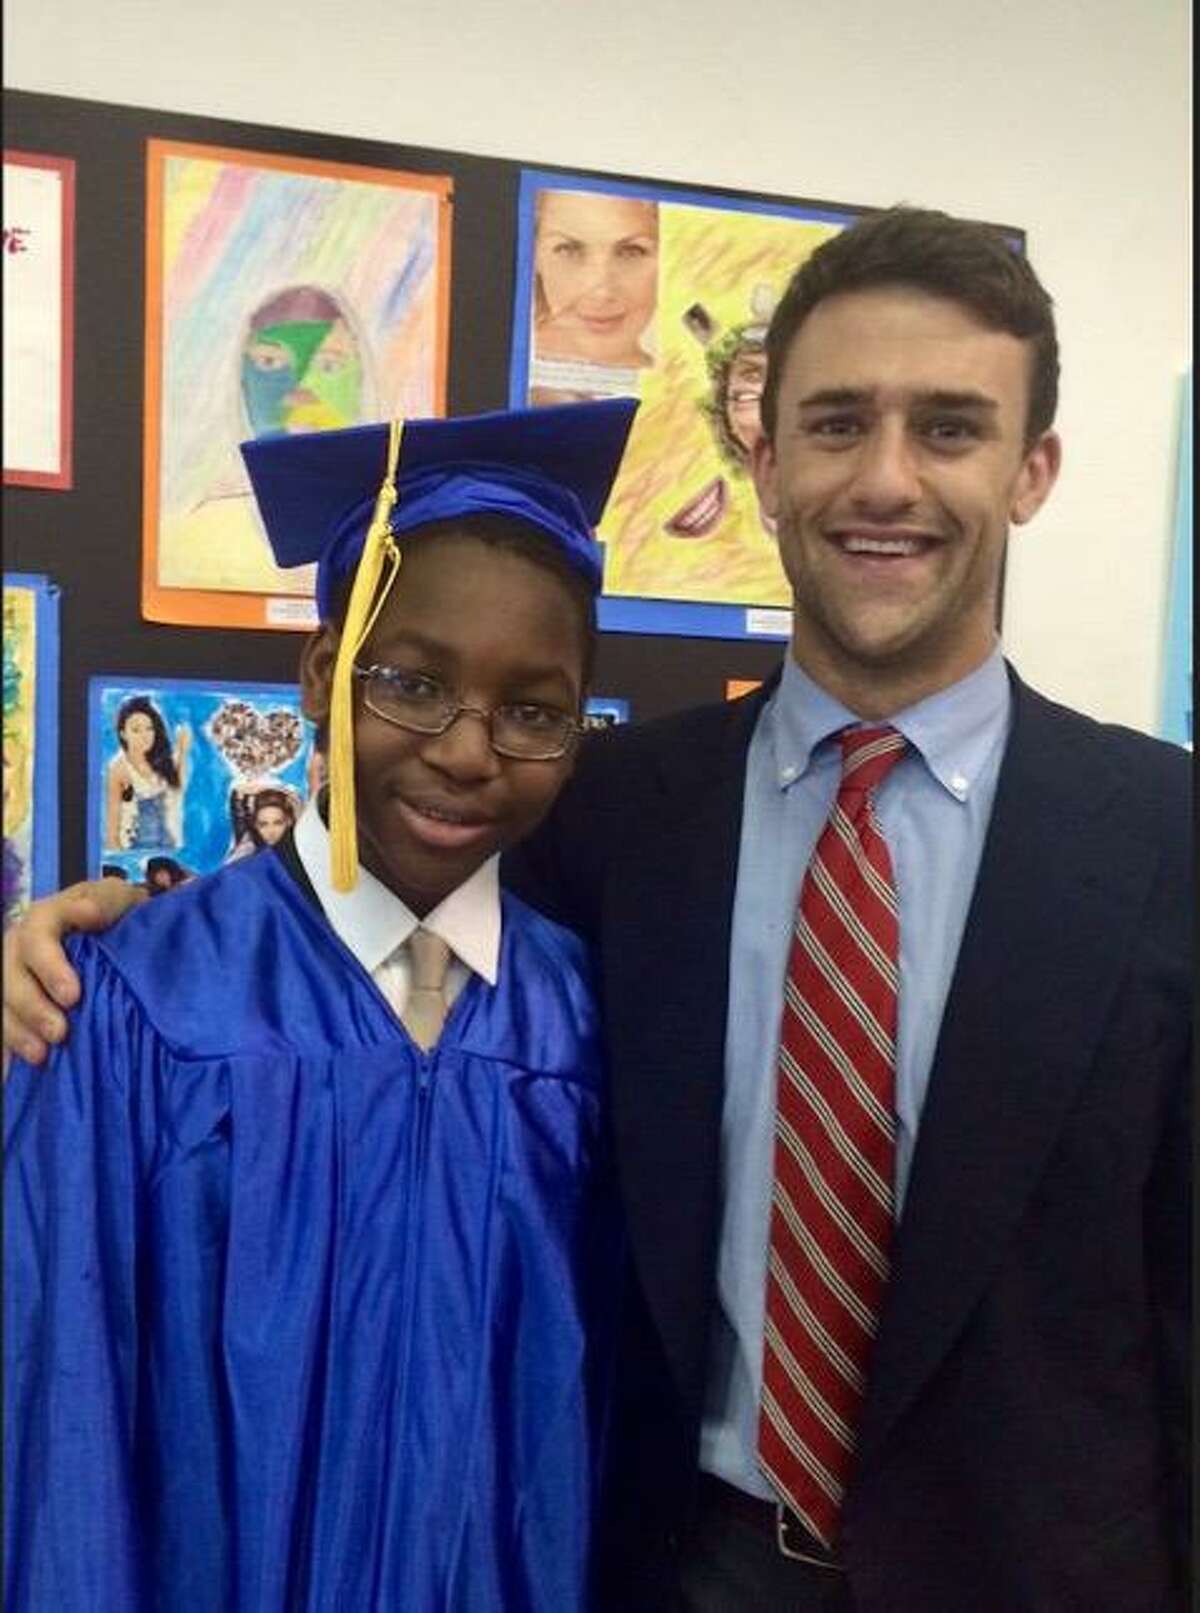 Nick Simmons, pictured here with former student Ismael Sy Savone, was selected by the administration of President Joe Biden to serve as a senior adviser to Education Secretary Miguel Cardona.